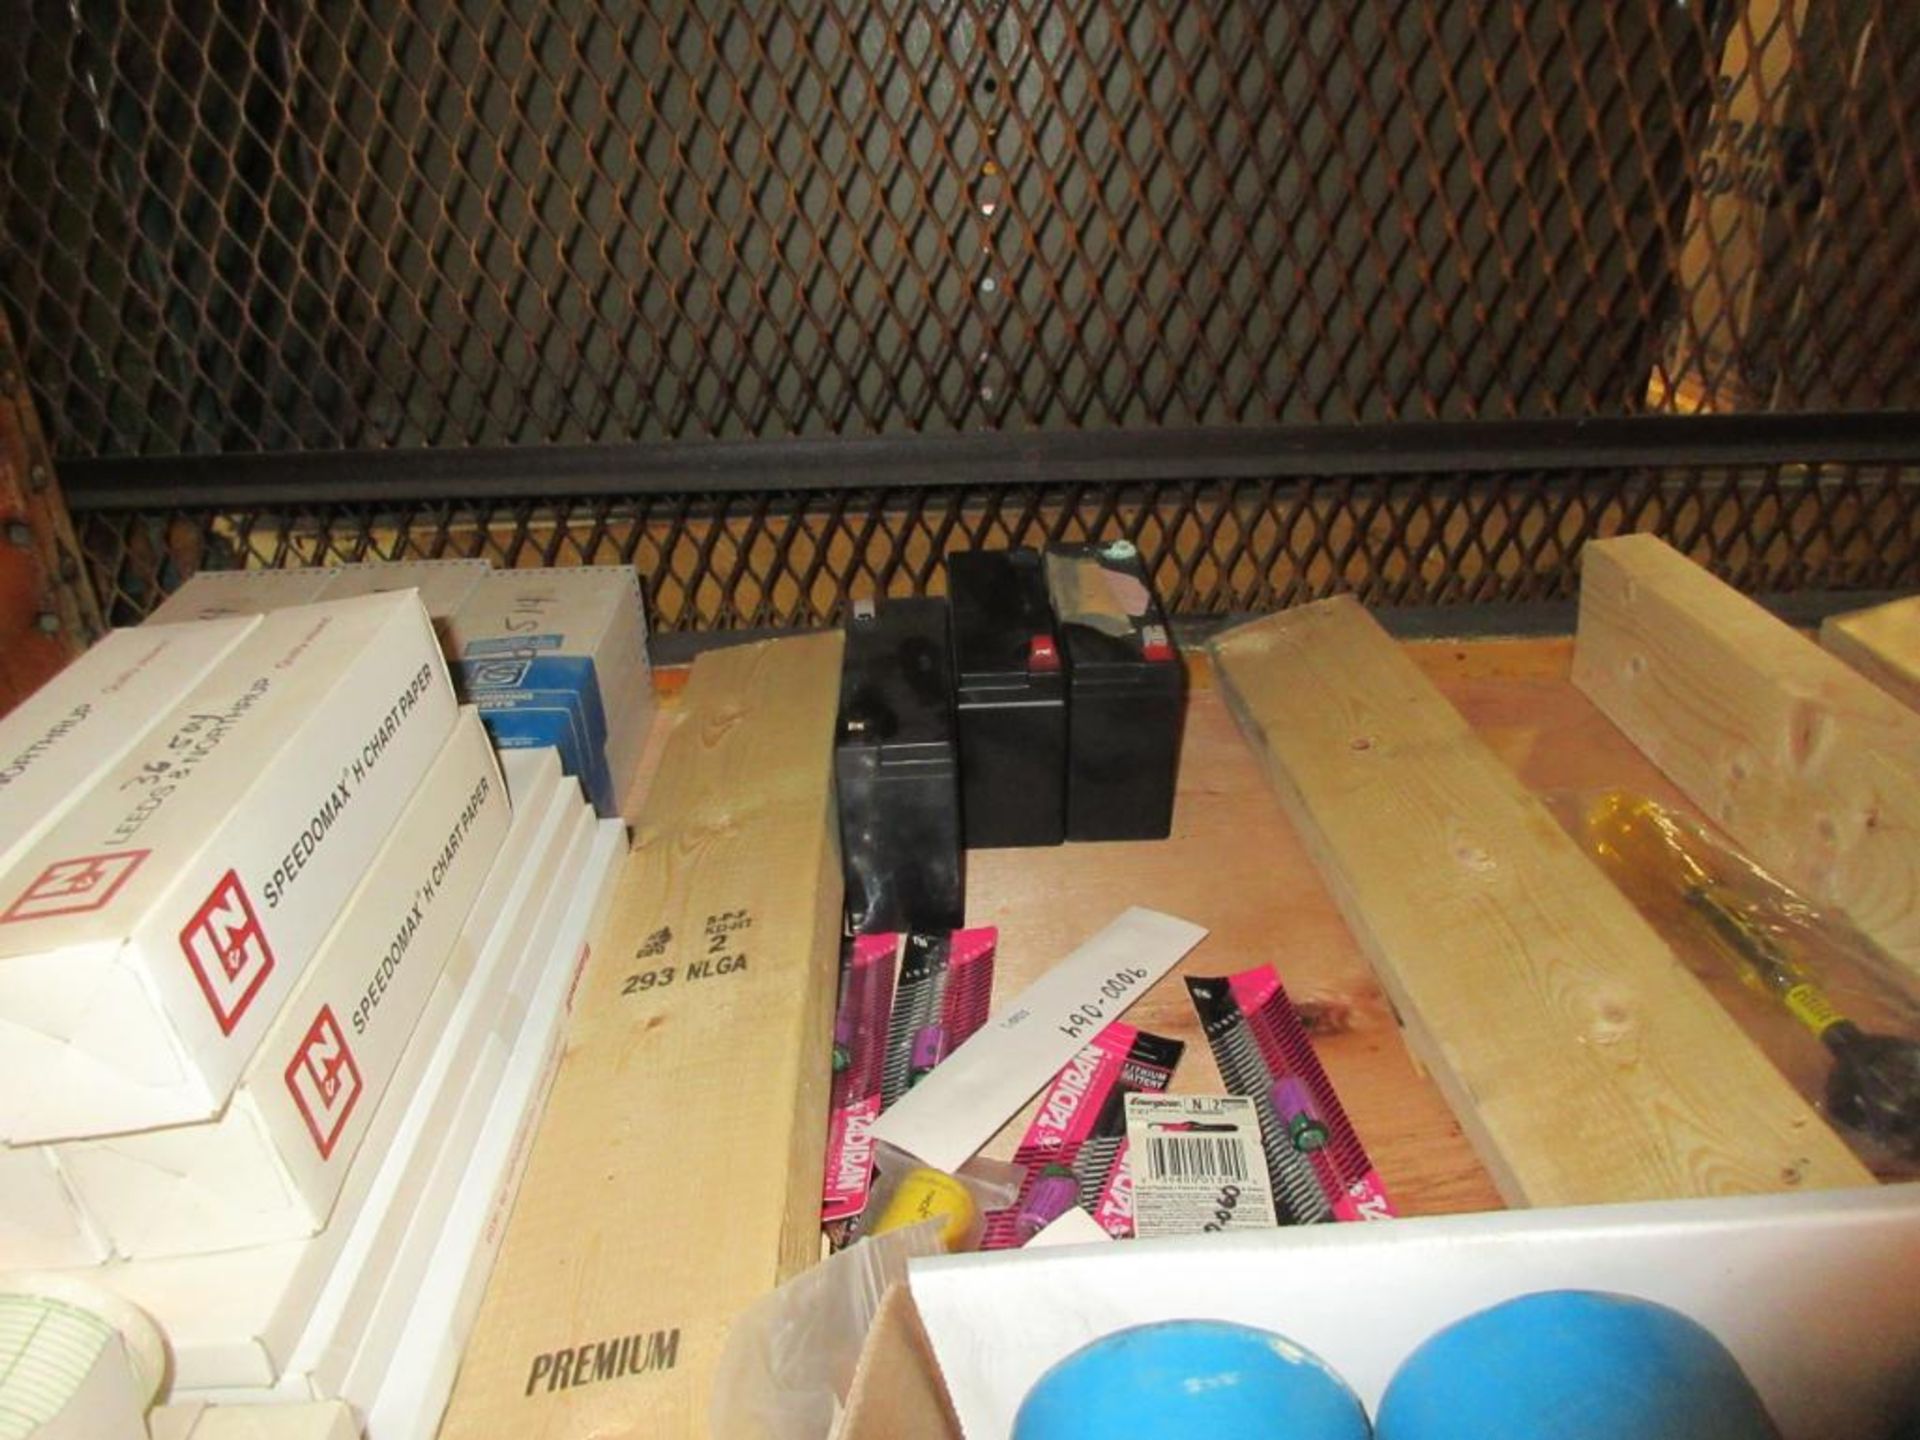 CONTENTS OF (22) SECTIONS PALLET RACK: ASSORTED ABRASIVES, SUNNEN STONES, TOOL BITS, DOVETAIL CUTTER - Image 20 of 43